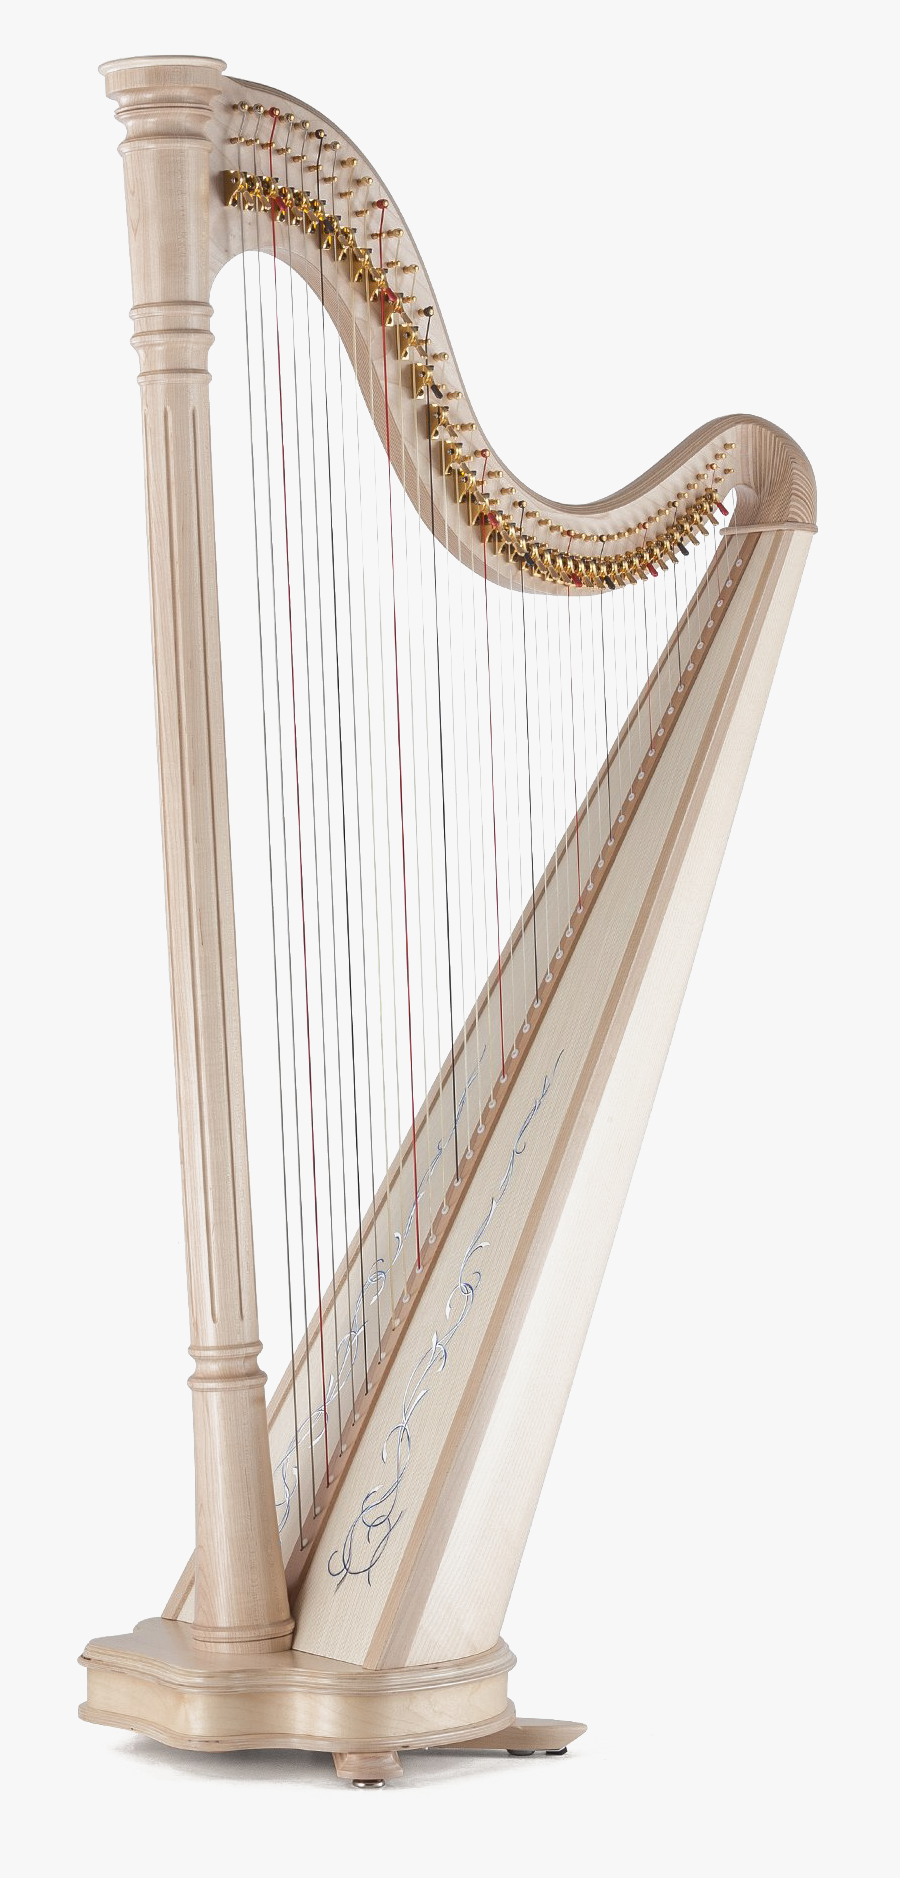 Wood Harp Png - All About The Harp, Transparent Clipart